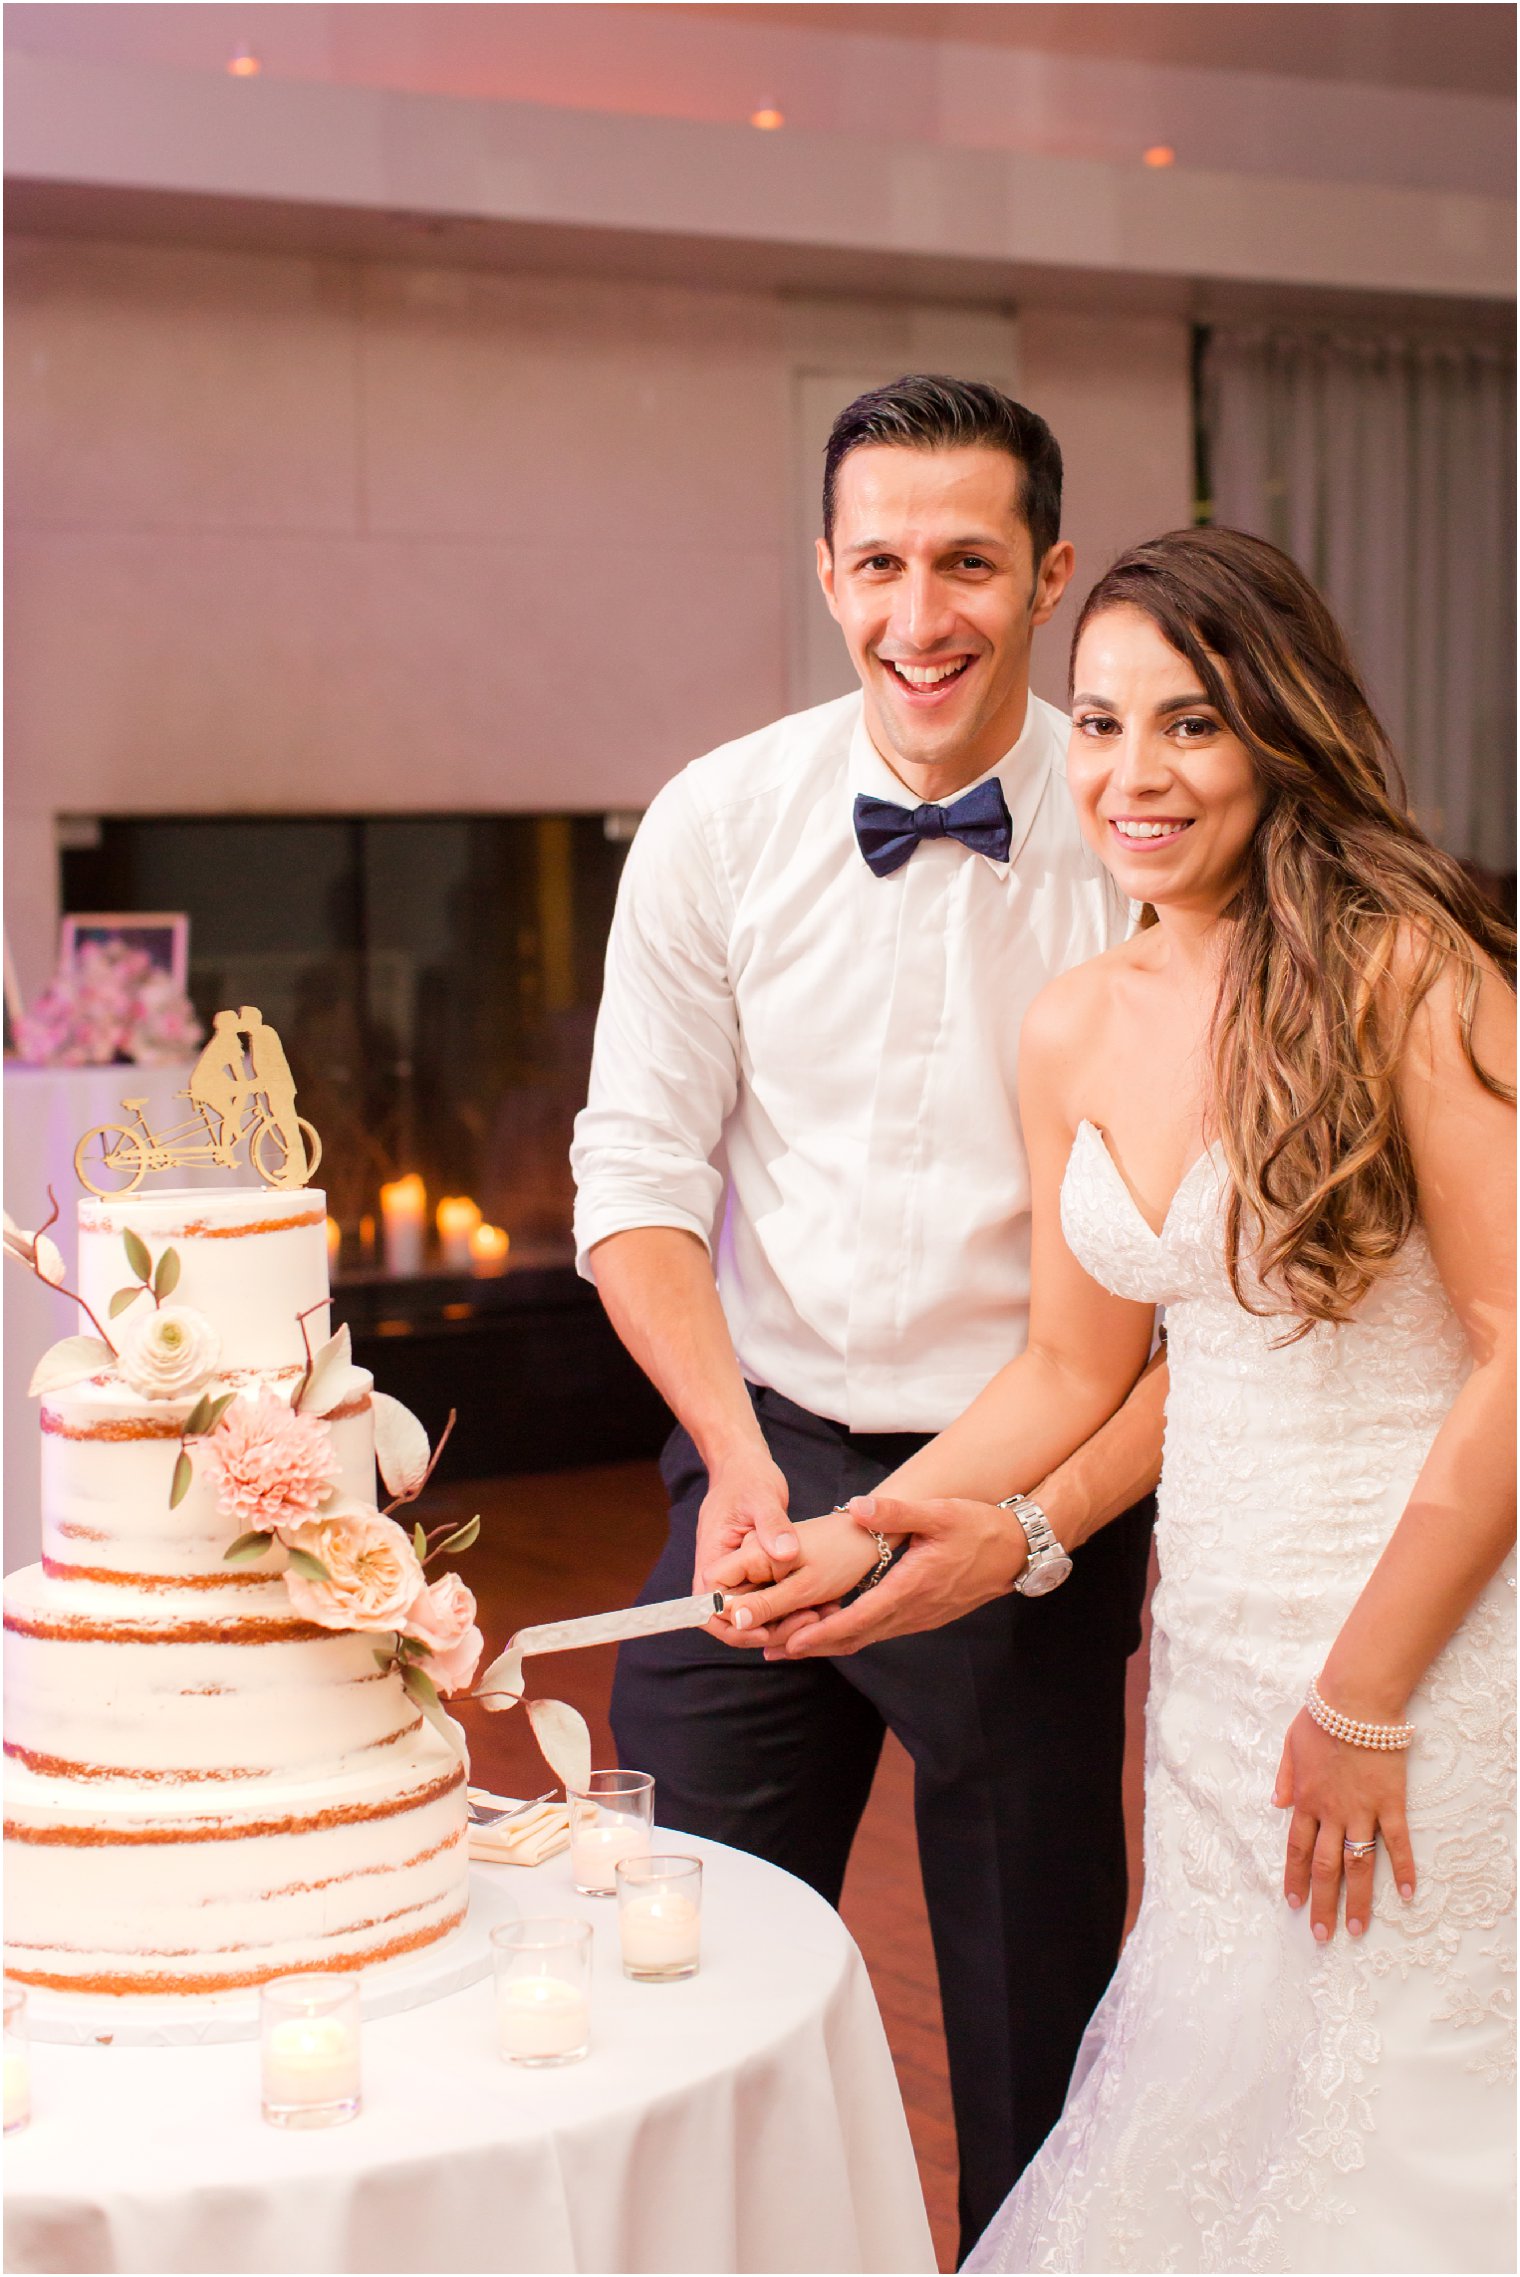 Bride and groom cutting their wedding cake at Battery Gardens | Photo by Idalia Photography